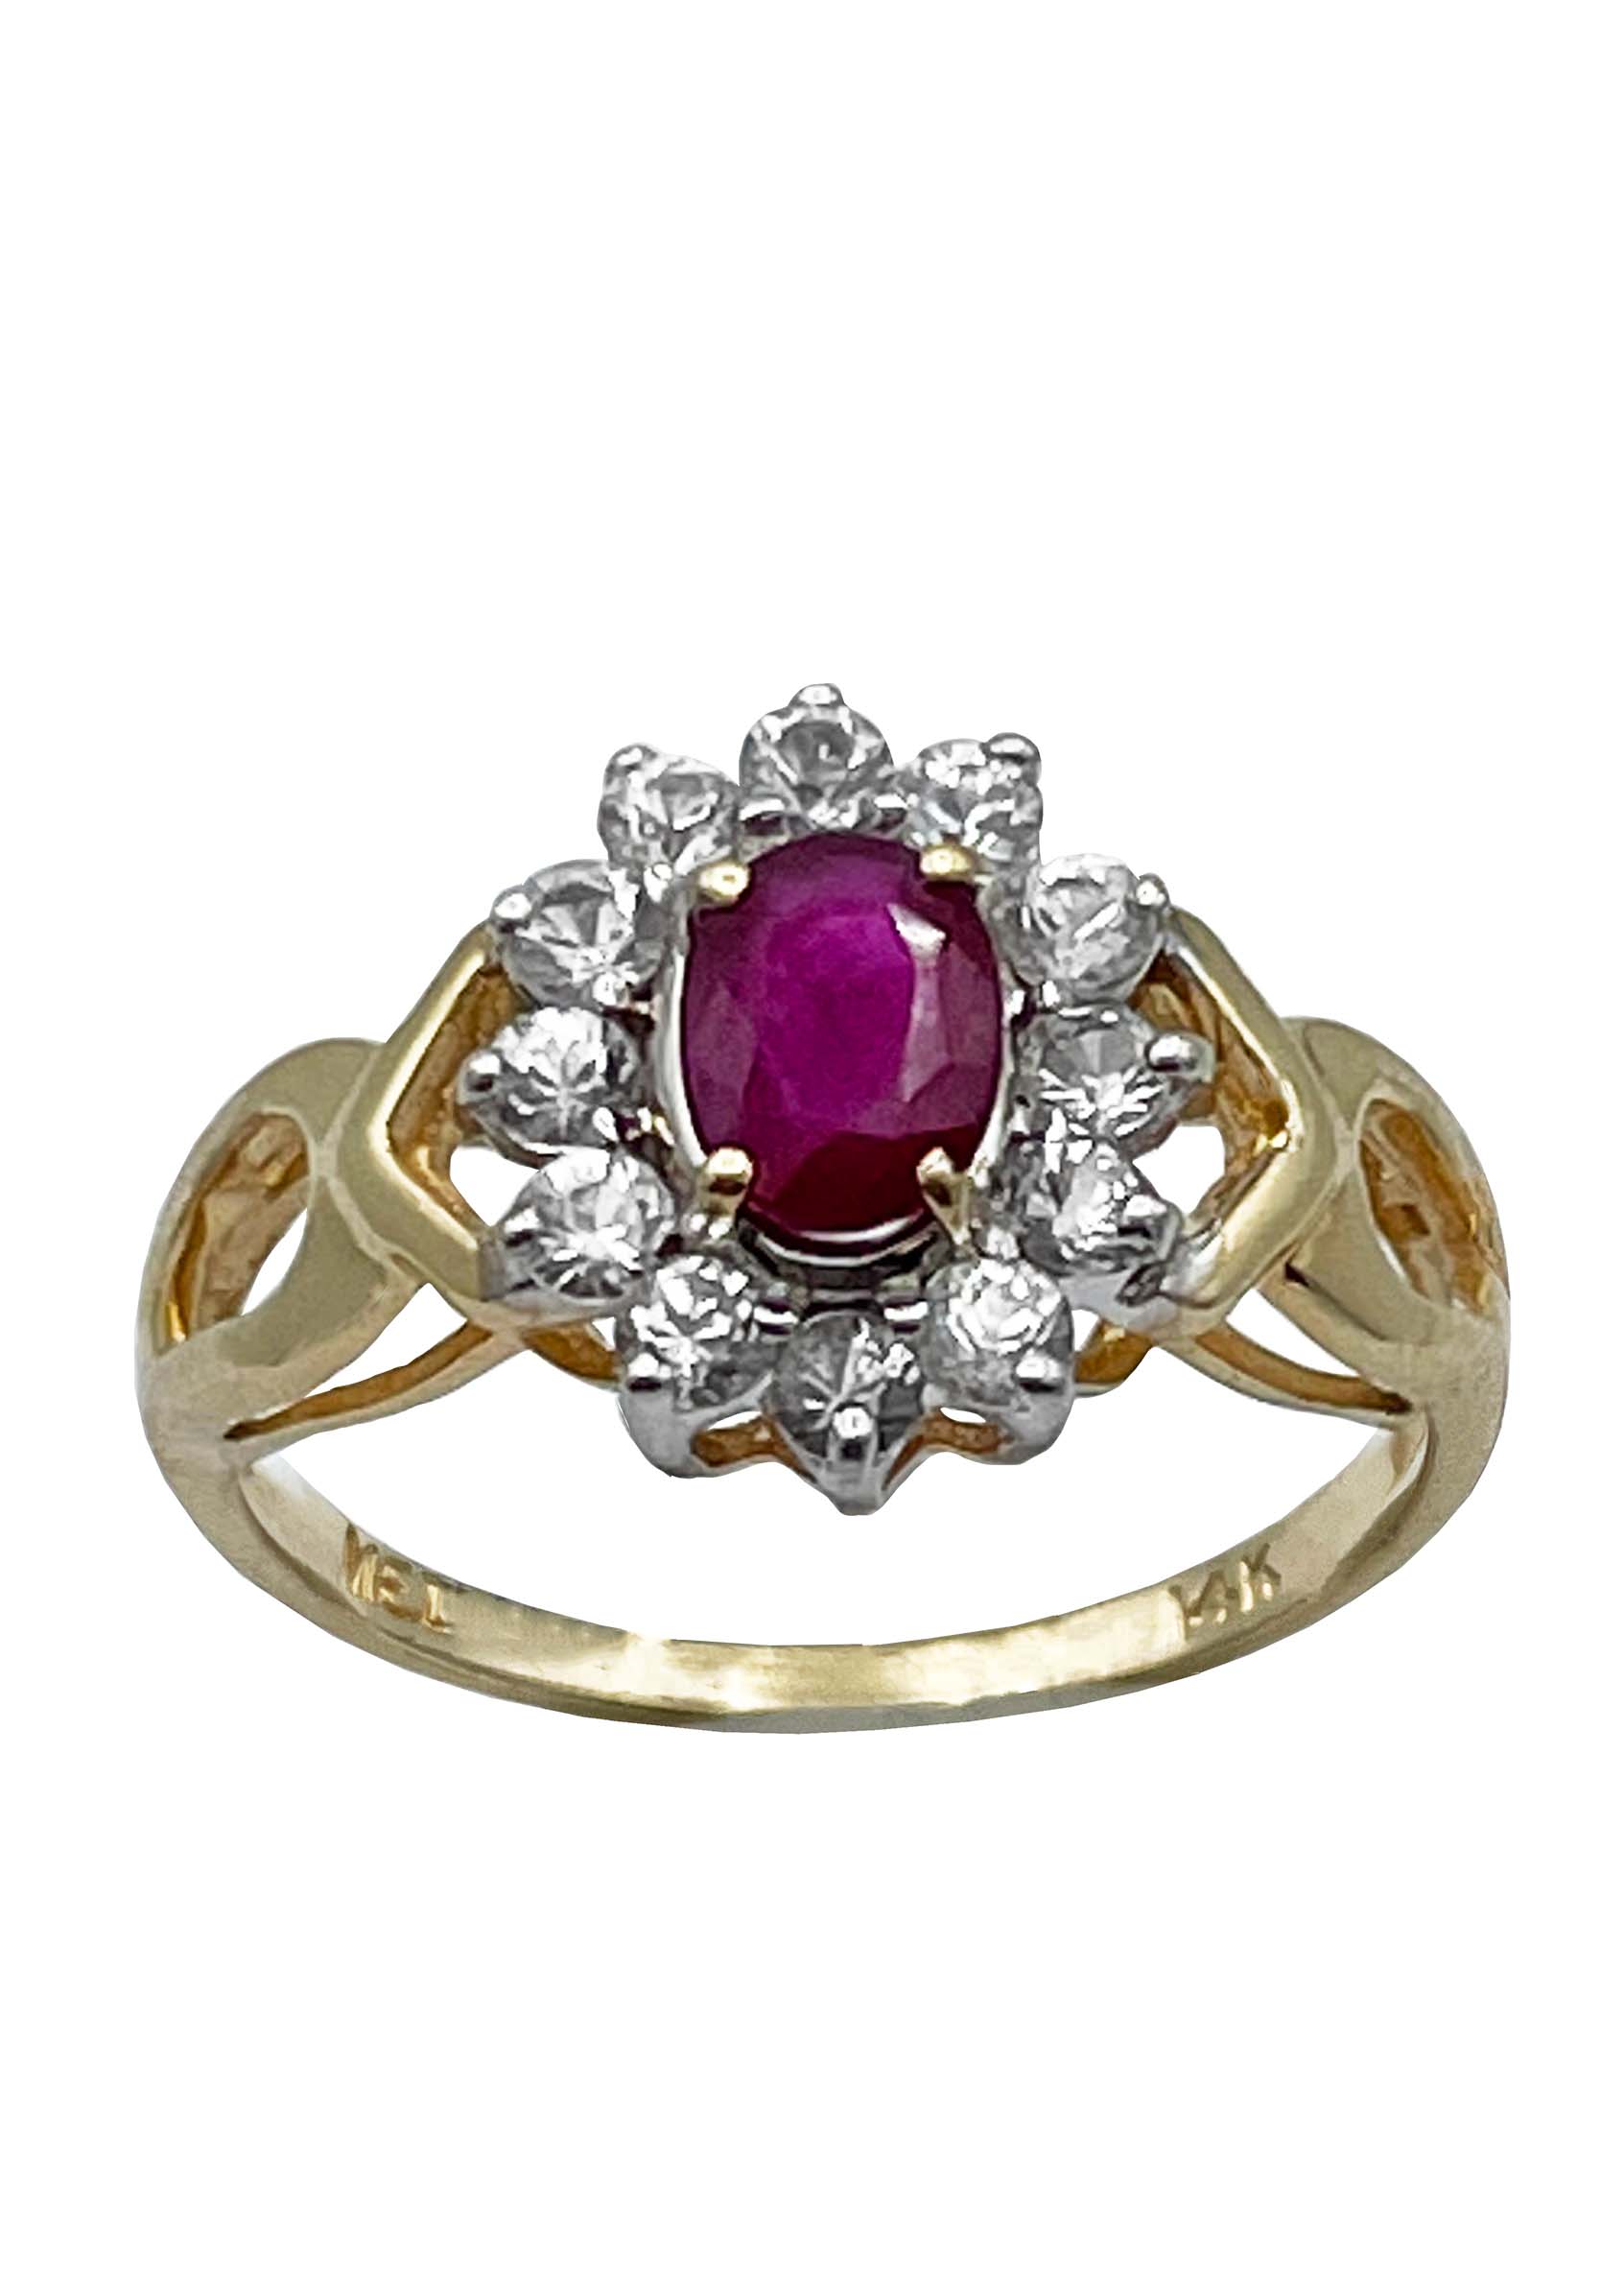 14k White and Yellow Gold Ruby Ring with Diamonds Image